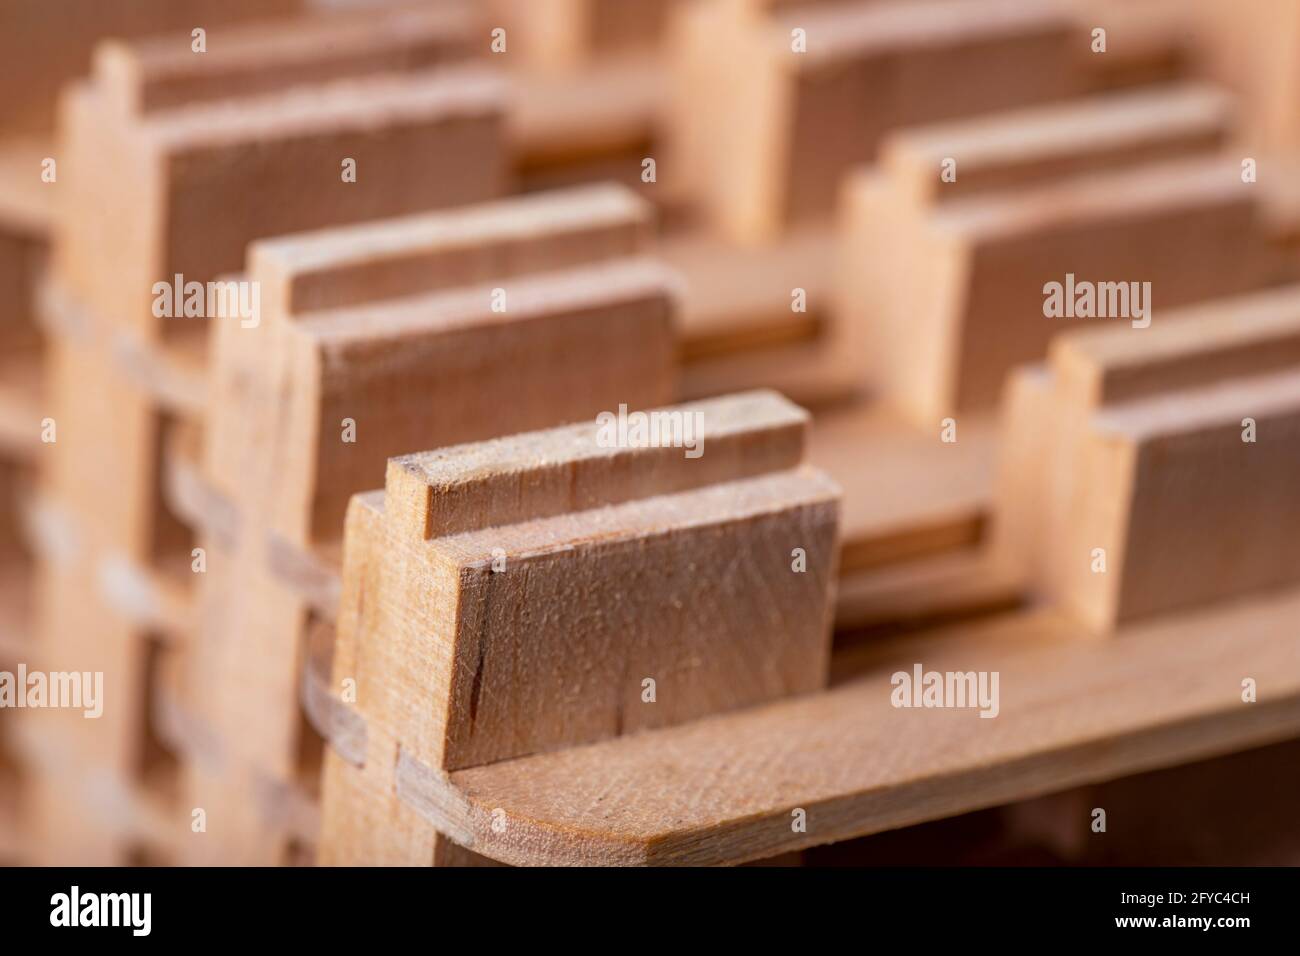 Pieces of wood milled and prepared for gluing. Wooden material used to build furniture. Light background. Stock Photo